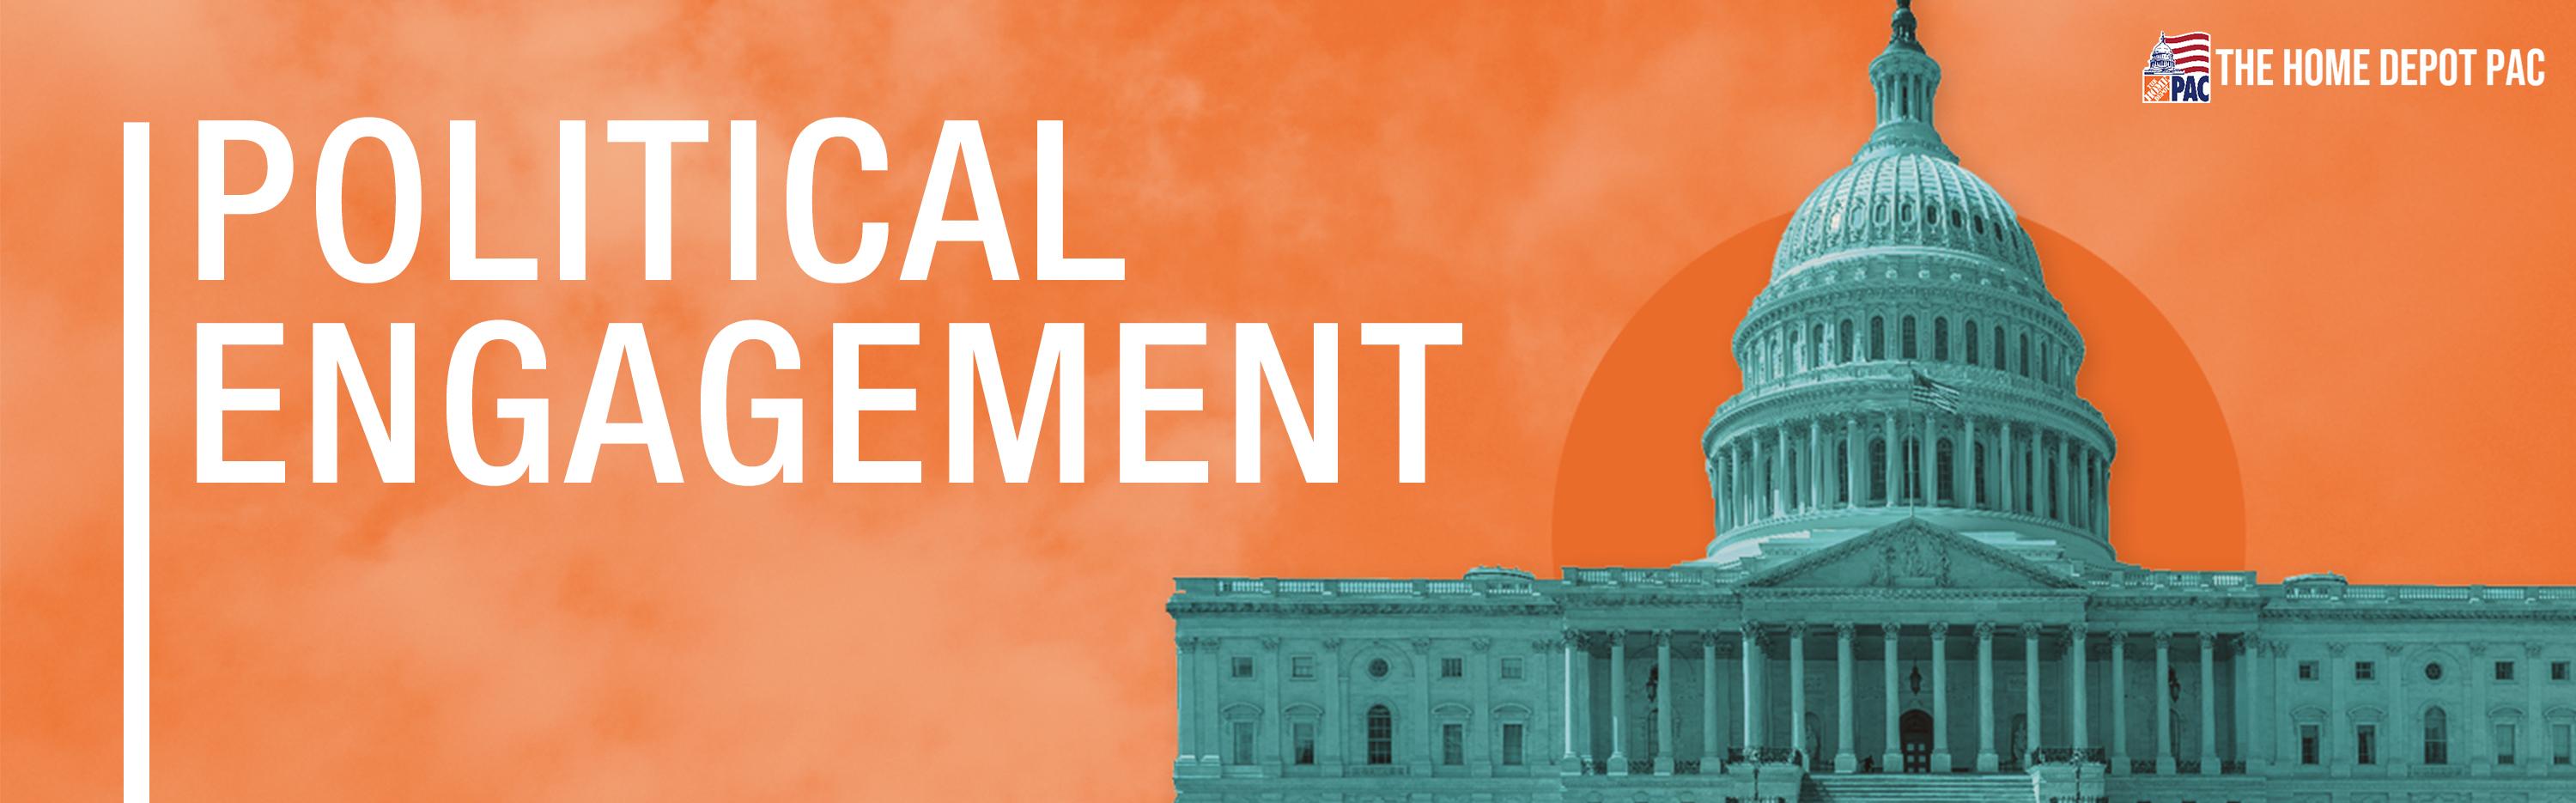 Political Engagement at The Home Depot | The Home Depot